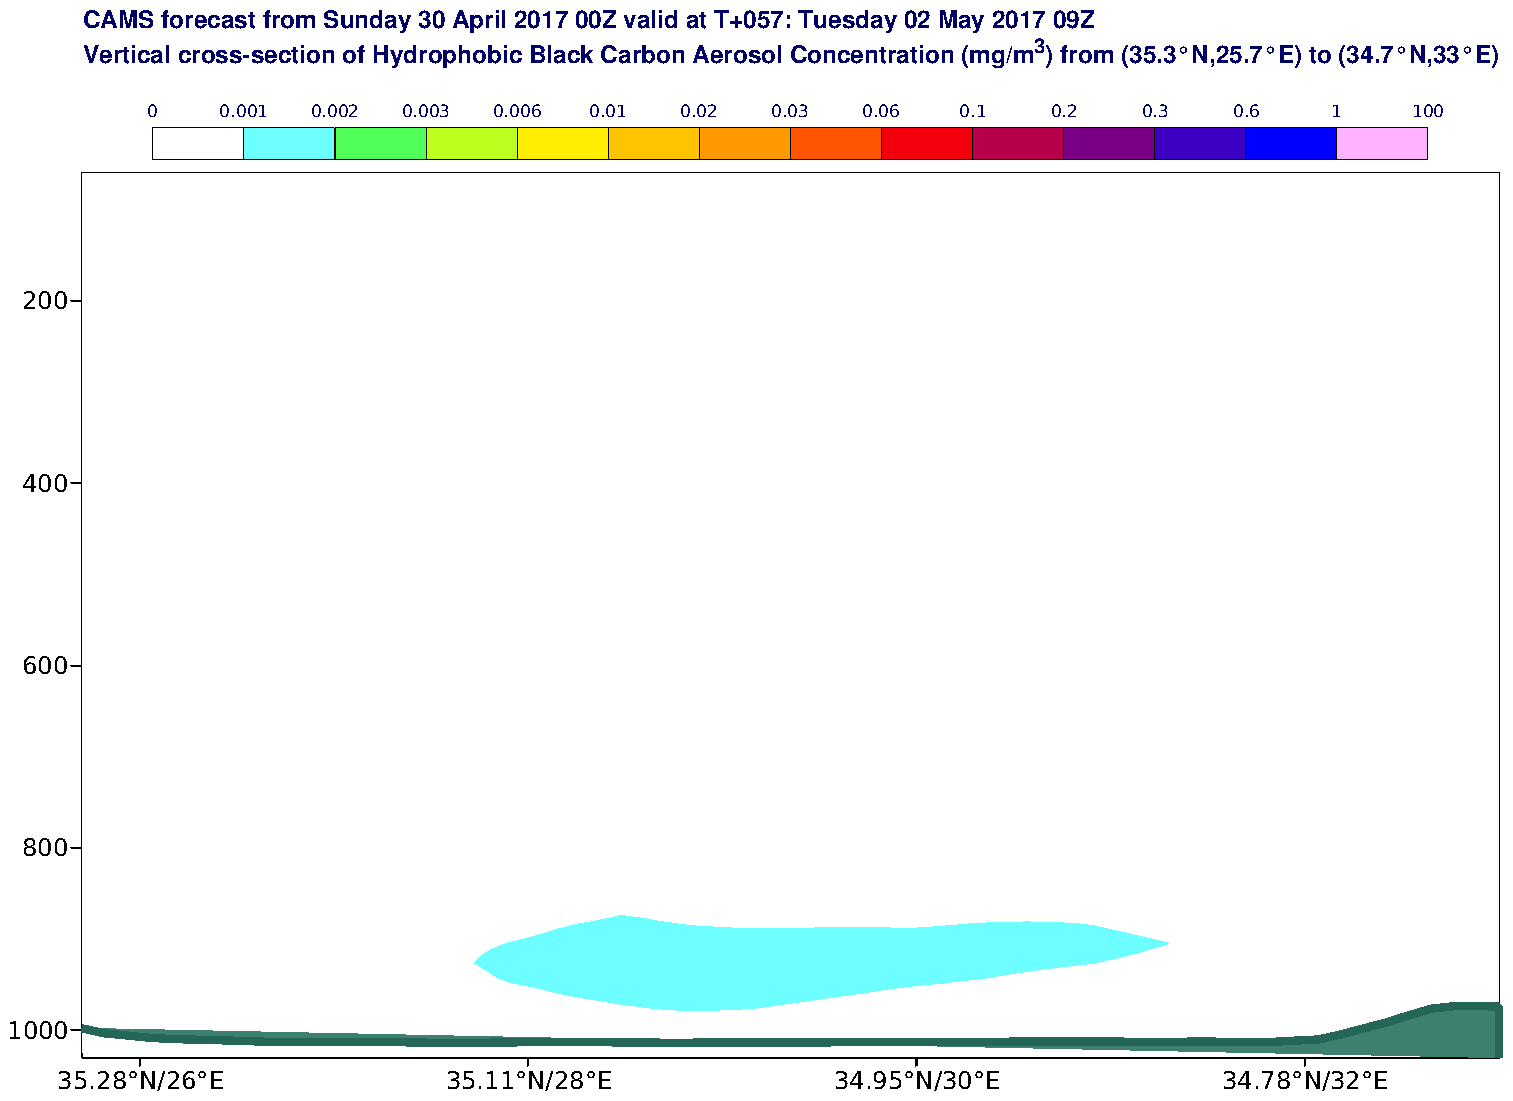 Vertical cross-section of Hydrophobic Black Carbon Aerosol Concentration (mg/m3) valid at T57 - 2017-05-02 09:00